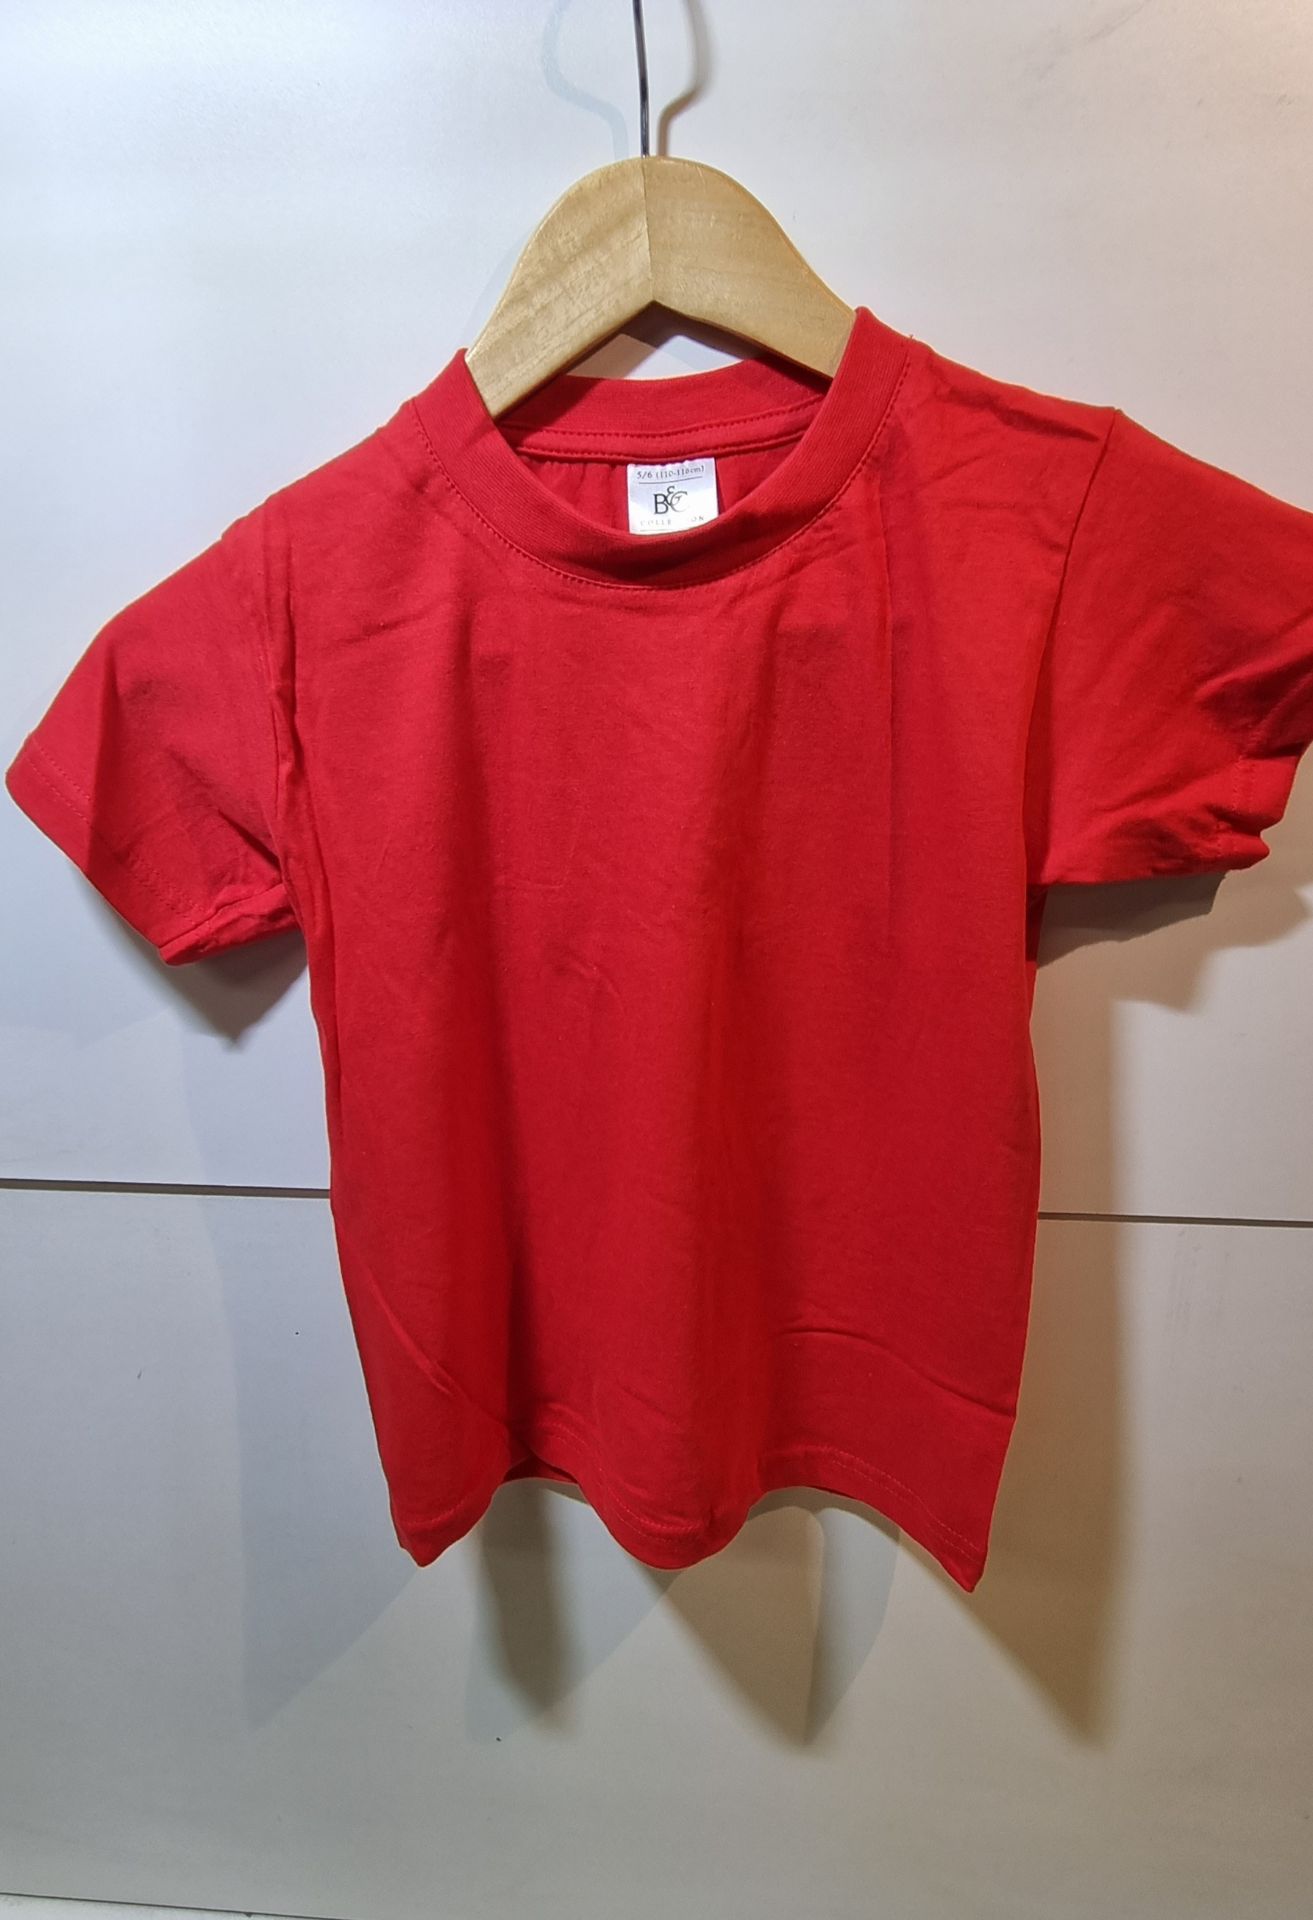 54 x B&C Collection/Fruit Of The Loom Adult/Childrens T Shirts in Various Colours & Sizes - Image 5 of 9